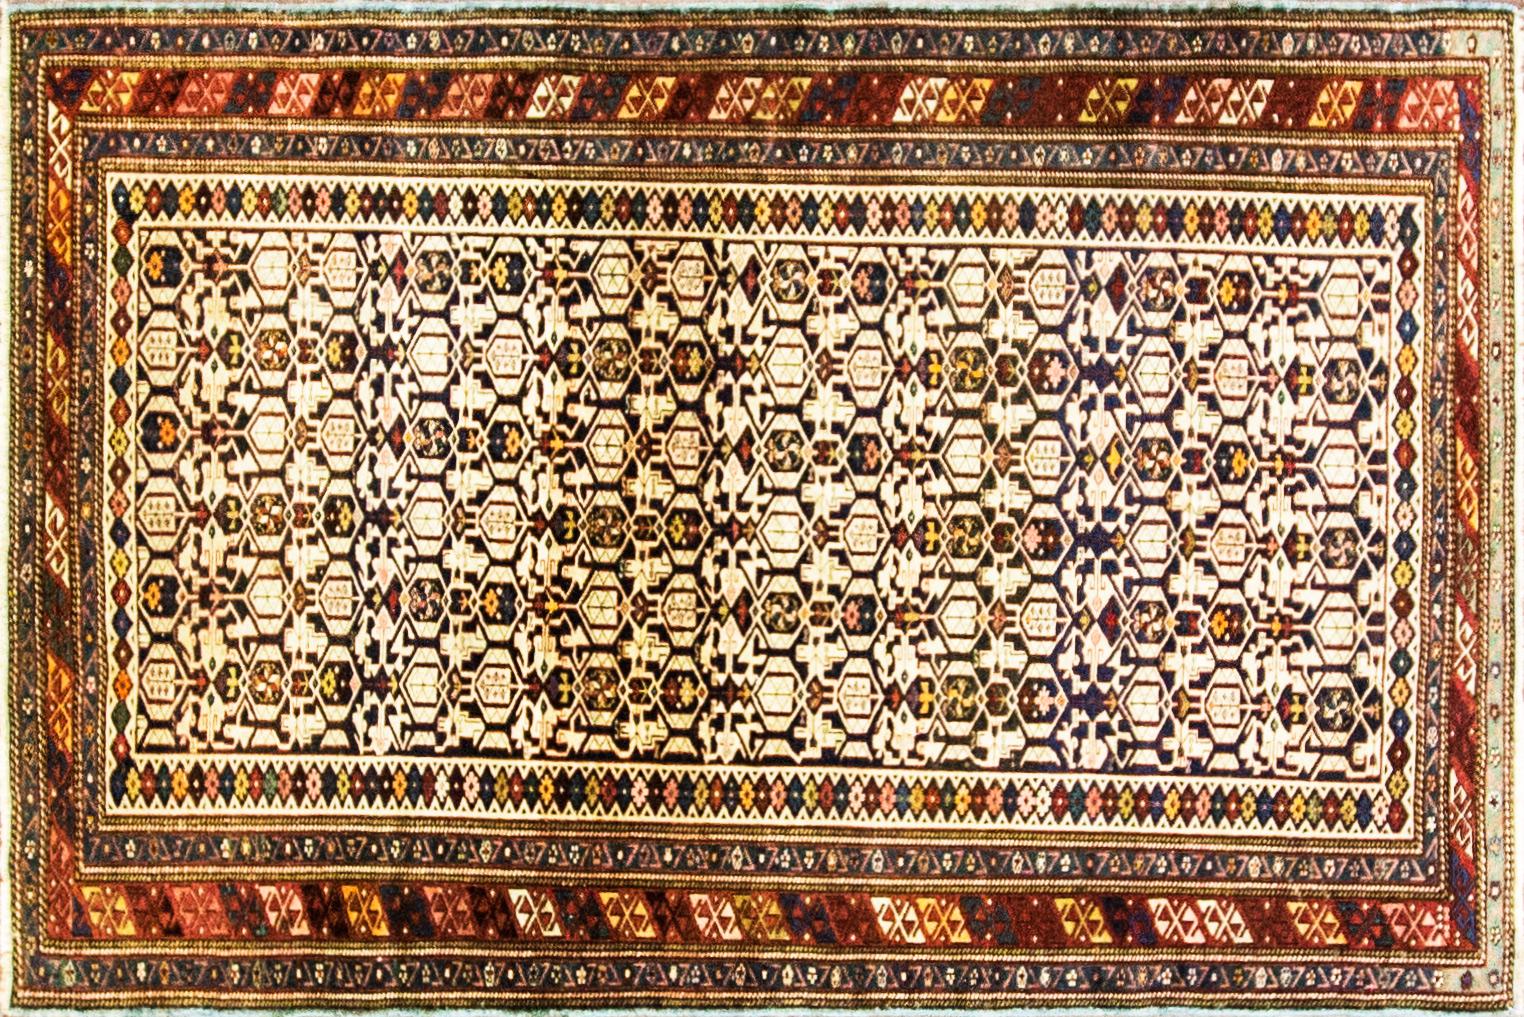 Quba rugs and carpets are named for a town that is located within the Daghestan region of Caucasus not far from the Caspian Sea; therefore, making Kubas a subdivision of Caucasian carpets. Kuba is at once a city and an area that was formerly a